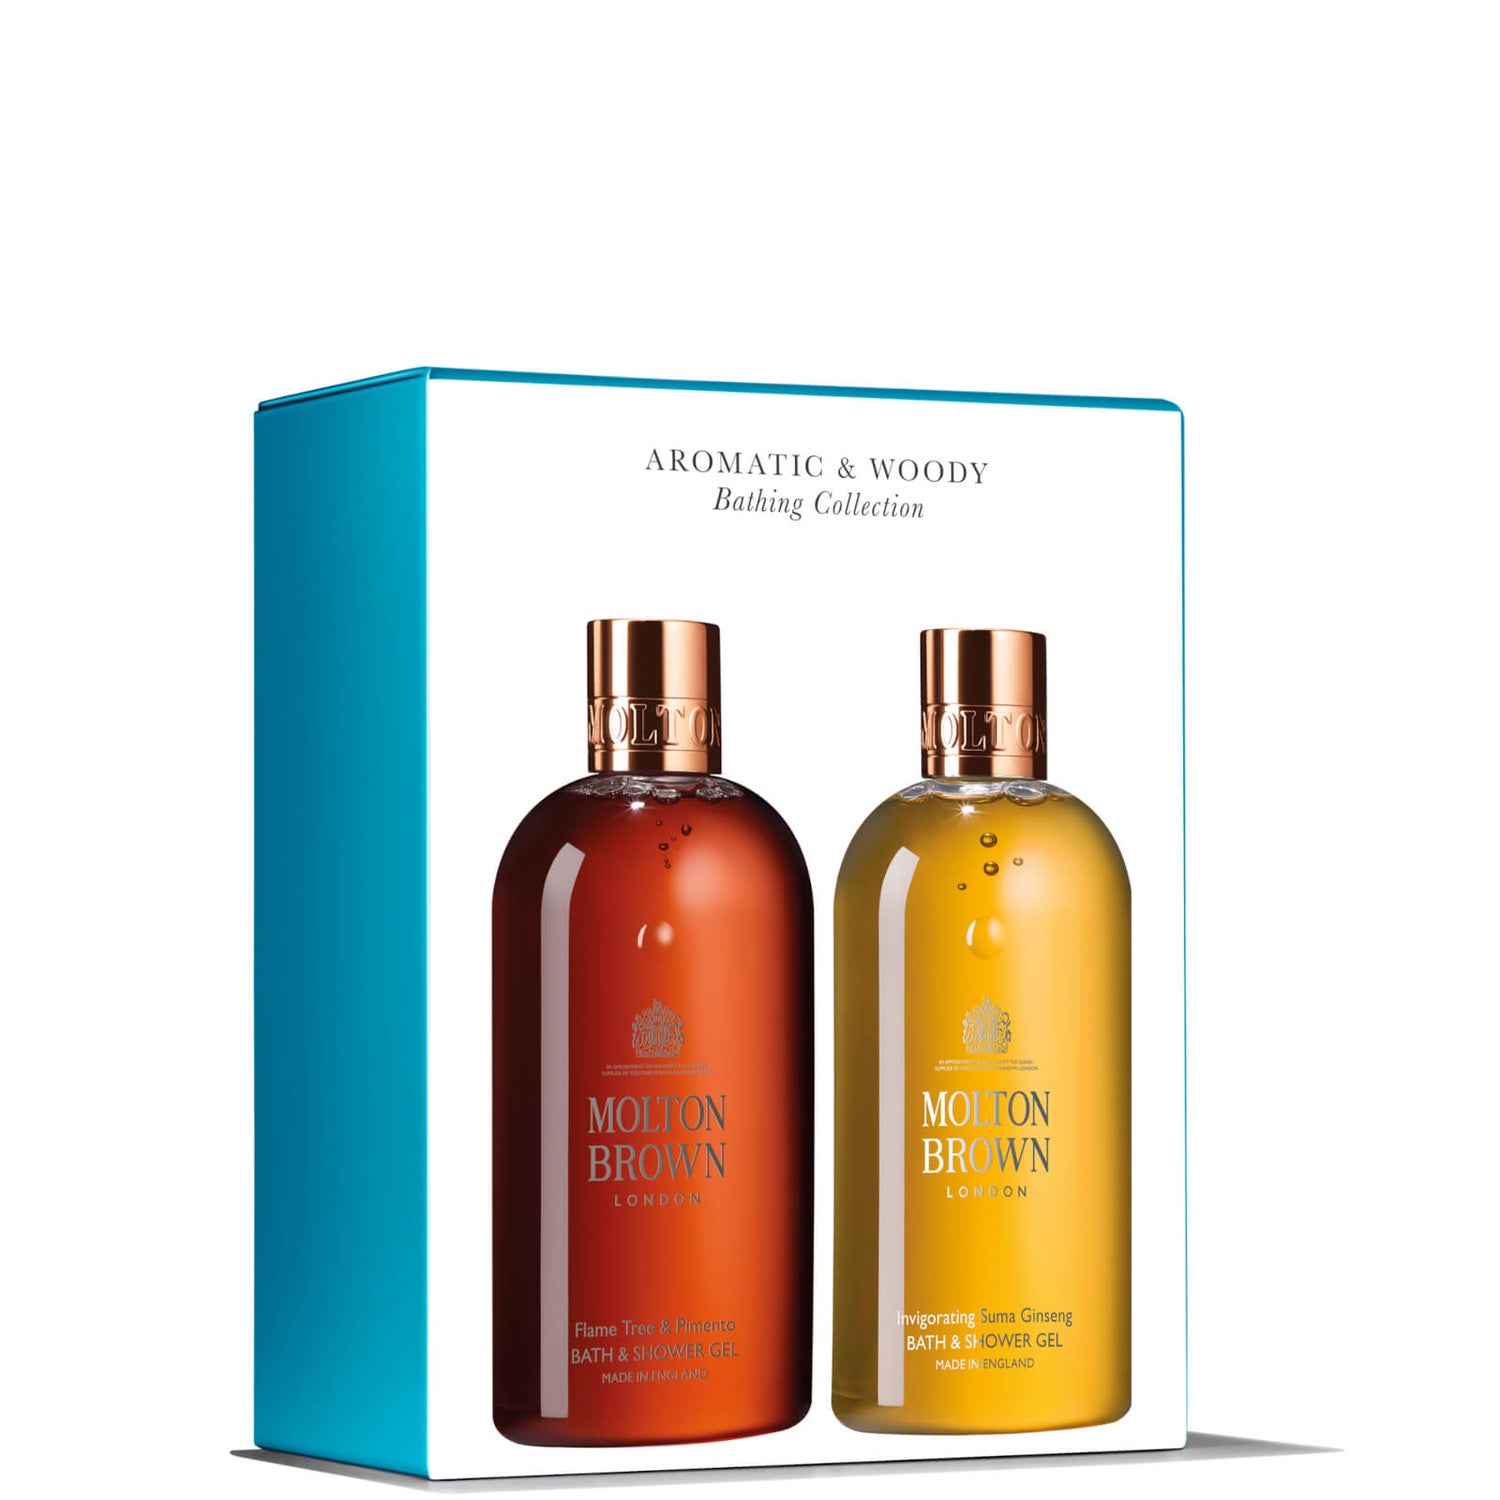 Molton Brown Aromatic & Woody Gift Set